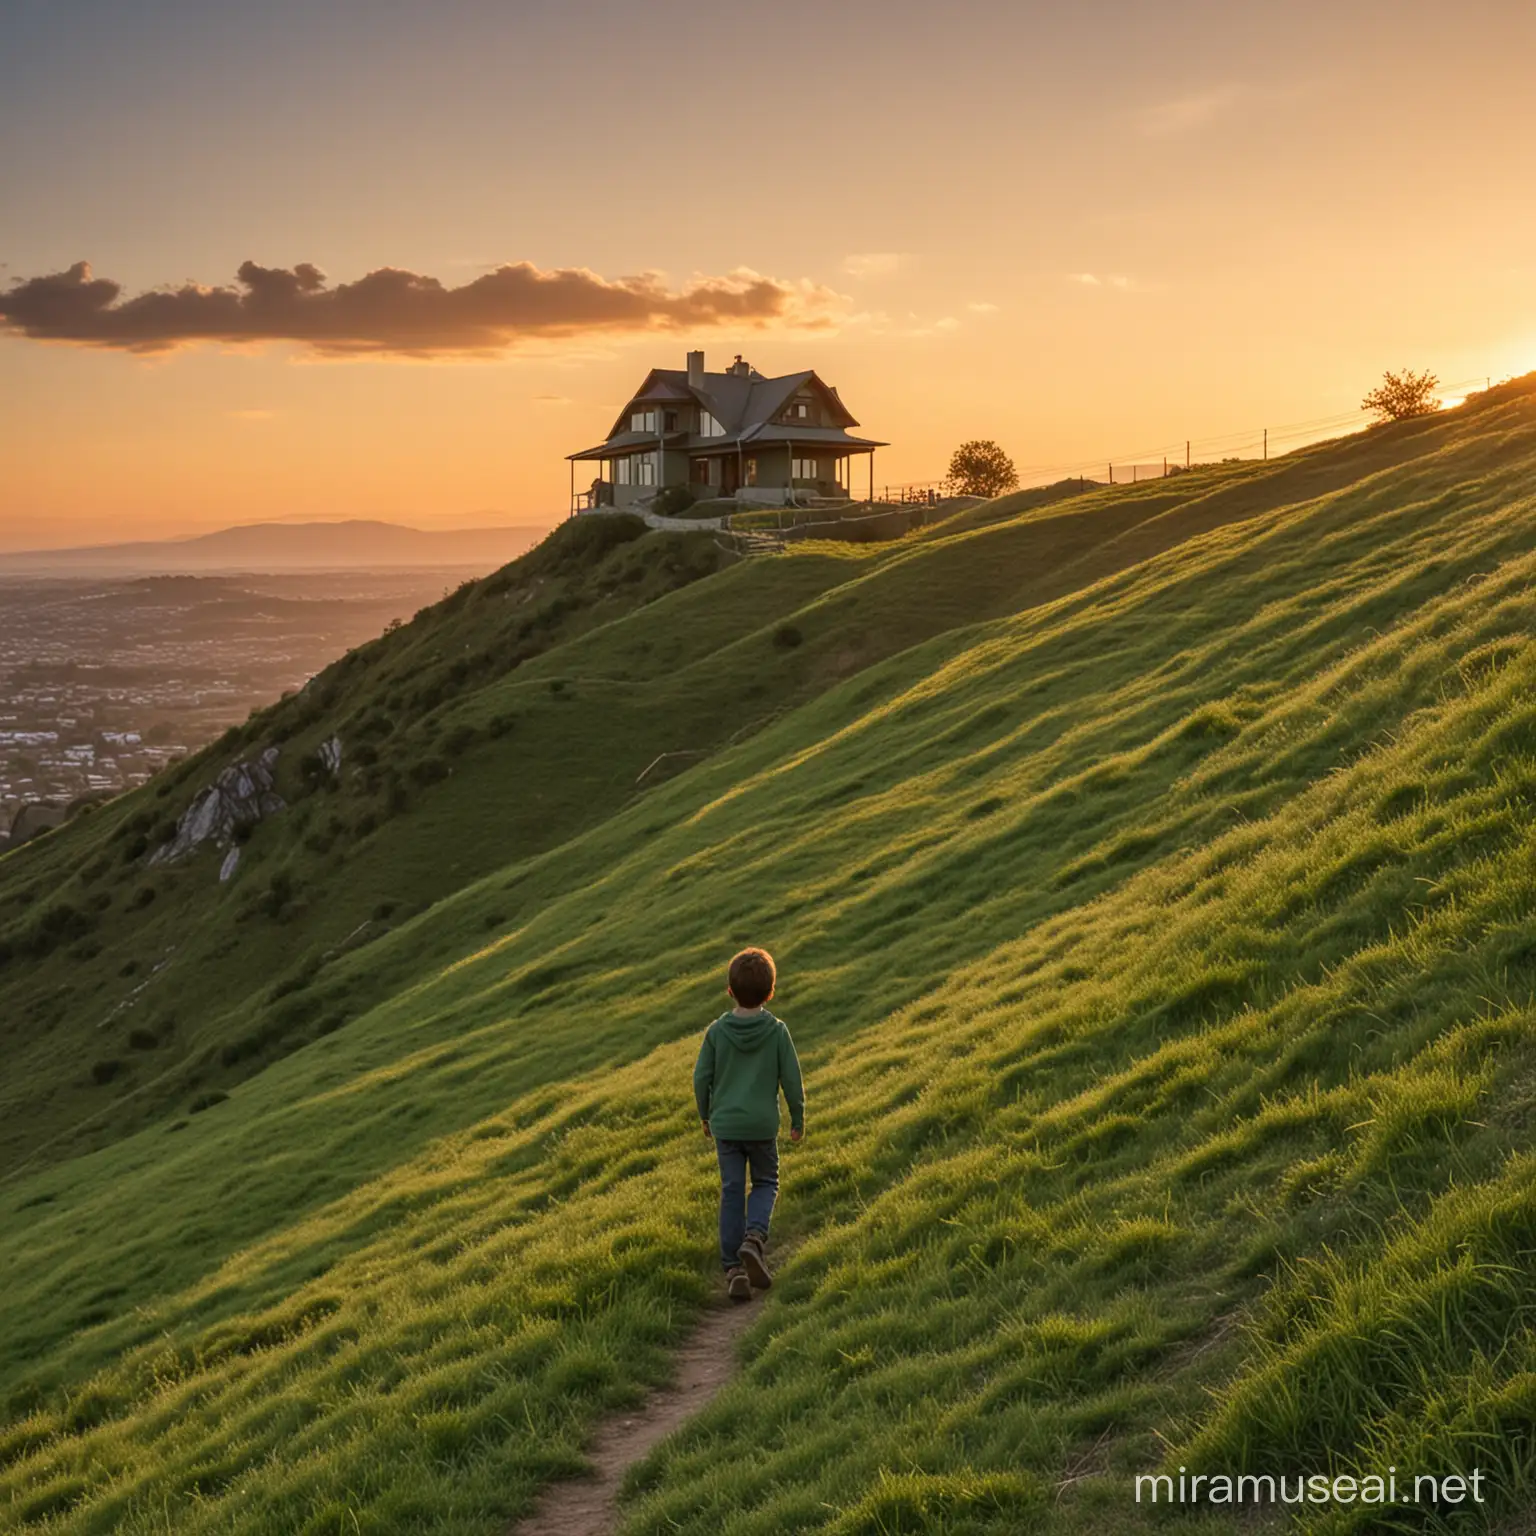 house on a hill, young boy walking up the hill, green, sunset